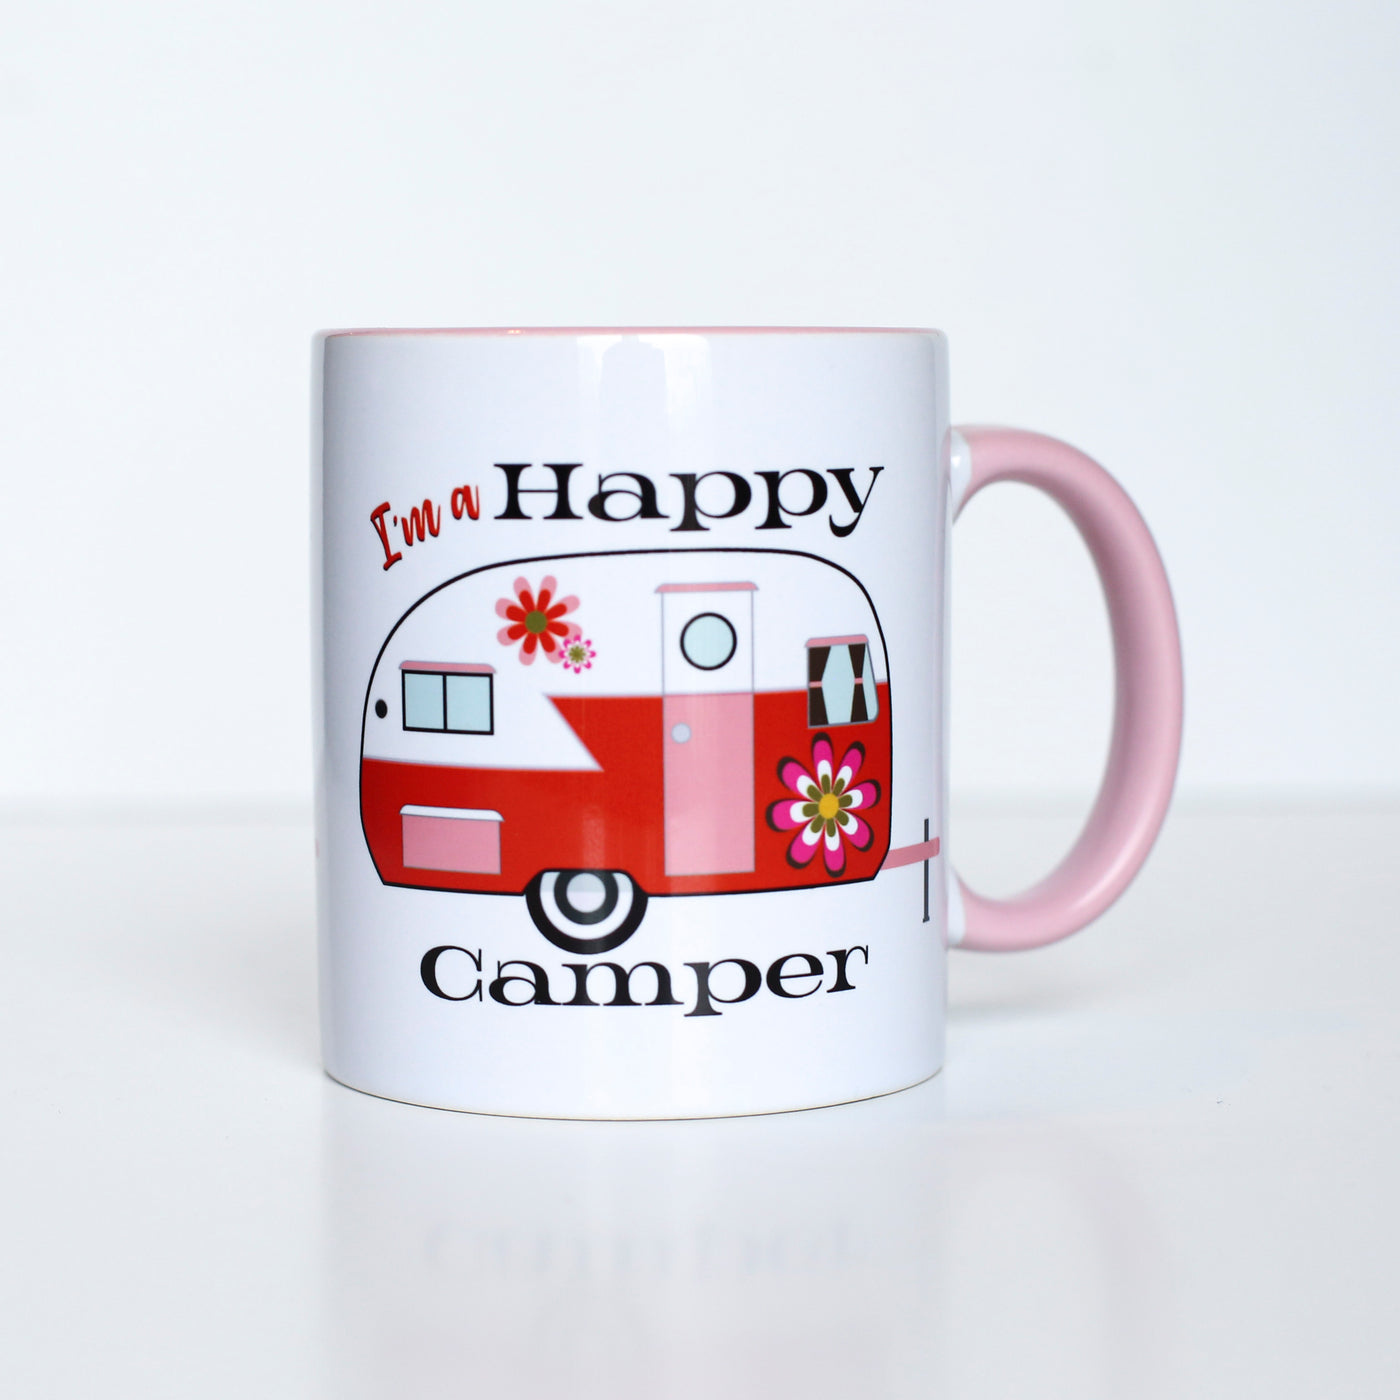 This 60's inspired Happy Camper with groovy flowers coffee mug gives you something special to wake up to besides the coffee! This vibrant mug features inside/handle color that will enhance the most creative of designs. Perfect for summer gifts, the Glamper Girl, or just to feel love on the bright side!  Ceramic mug with contrasting orange inside and handle coloring 11 oz mug Dishwasher and microwave safe